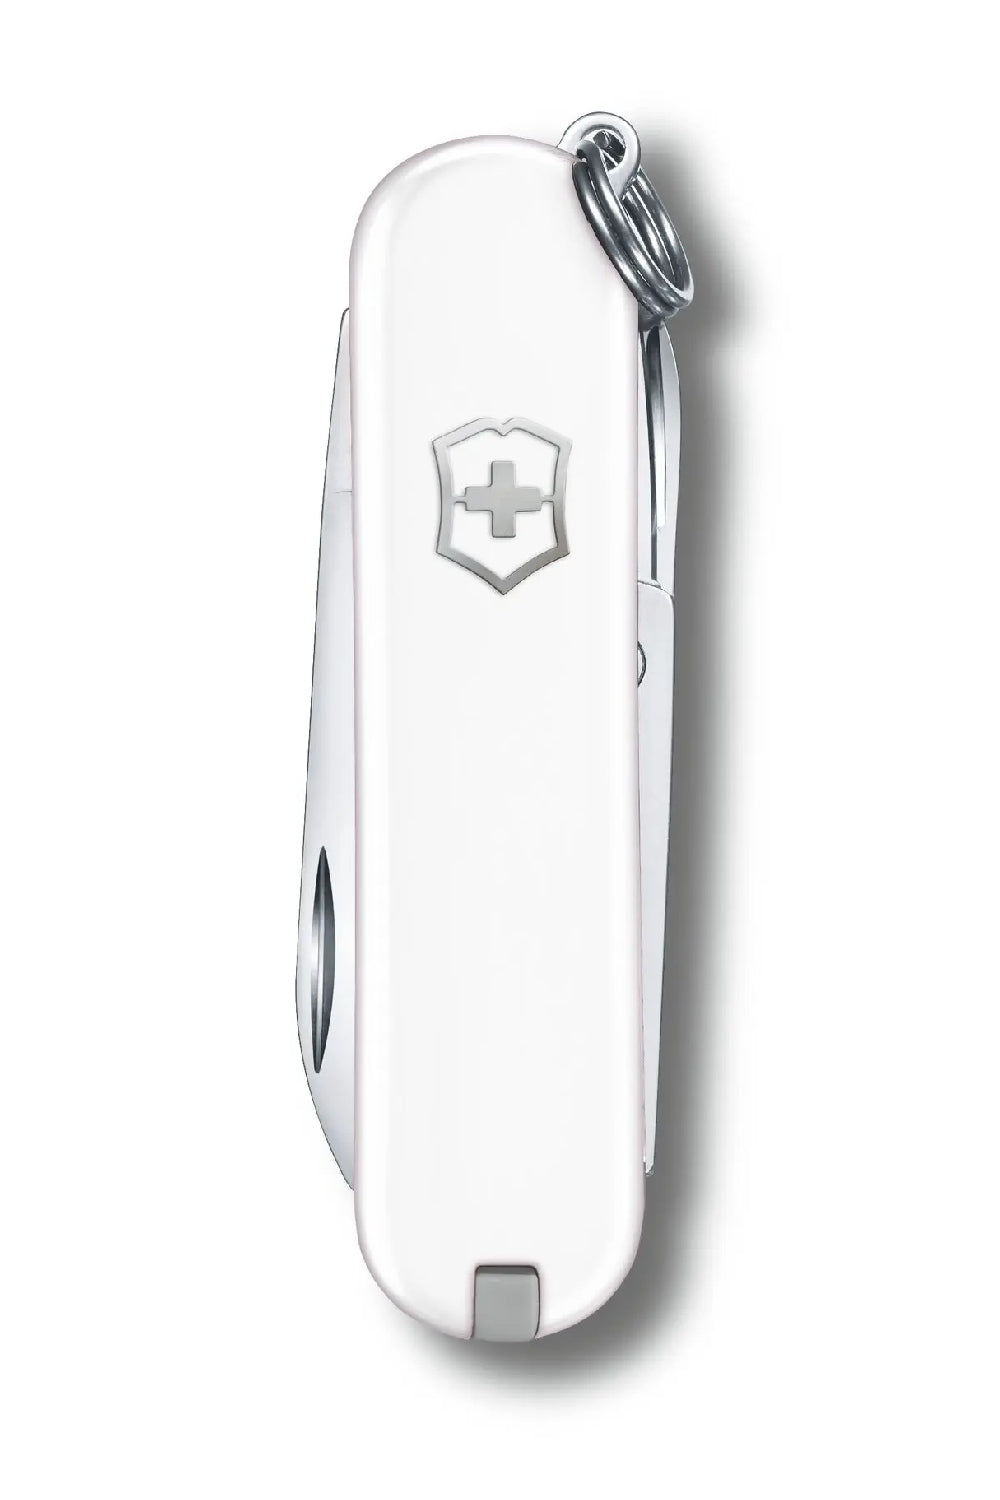 Victorinox Classic SD Swiss Army Small Pocket Knife in Falling Snow